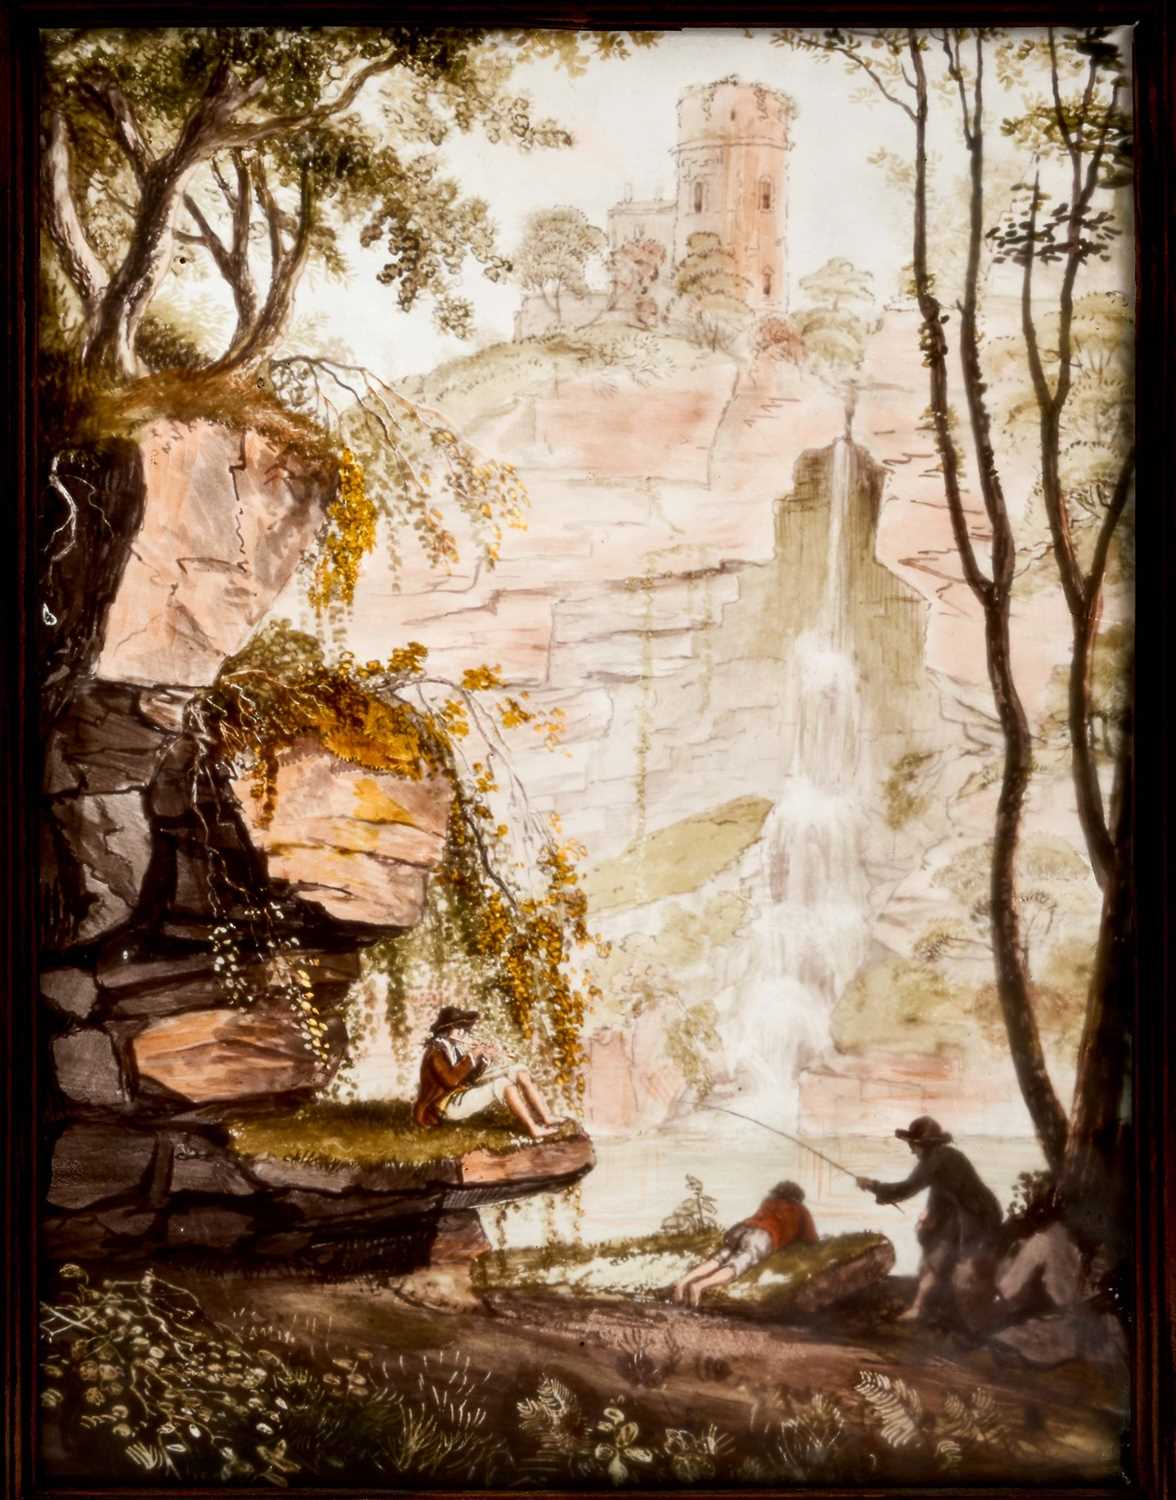 18th century reverse painting on glass, depicting figures in a romantic landscape, 29 x 21cm, framed